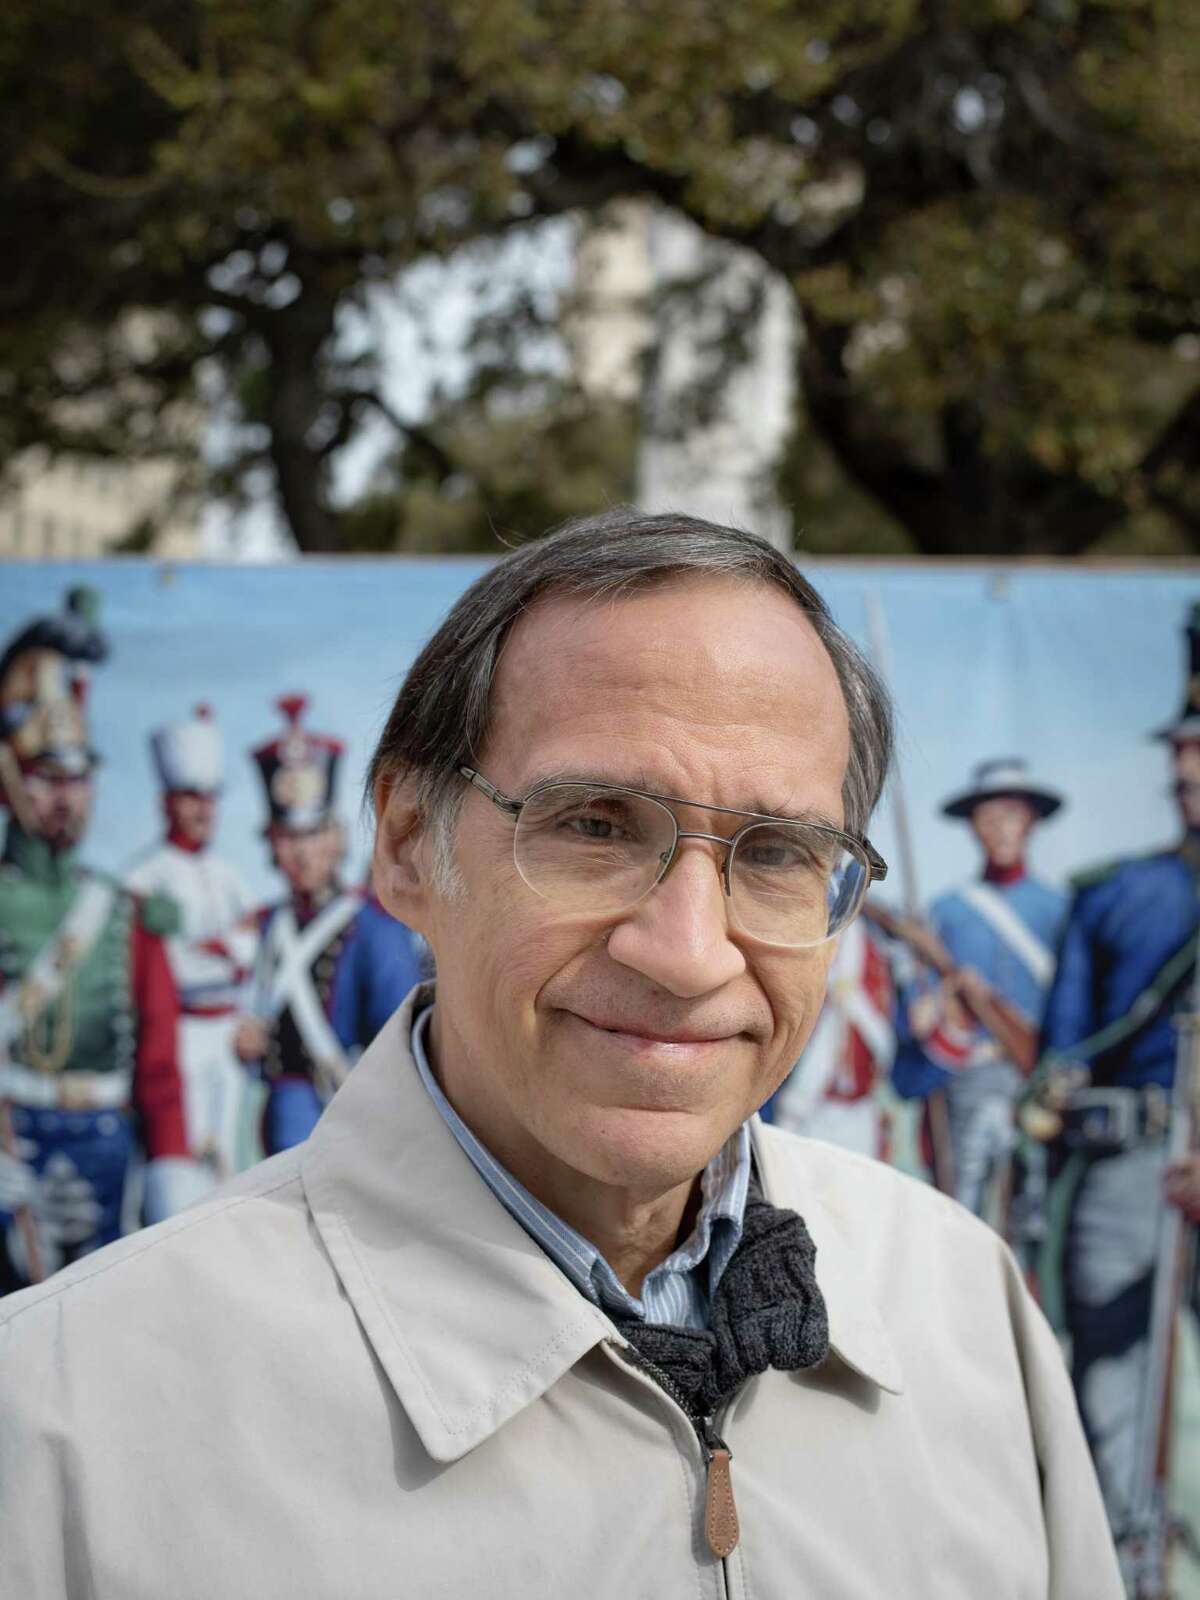 Gary Zaboly, an historical artist and illustrator, poses for a portrait in front of an enlarged version of his work in Alamo Plaza where representations of his work are displayed on Monday, February 25, 2019. Zaboly has been depicting the Alamo, its occupants, defenders and attackers in his work since the 1990s. Many of his works are owned and displayed in the Alamo's Wall of History on the premises.